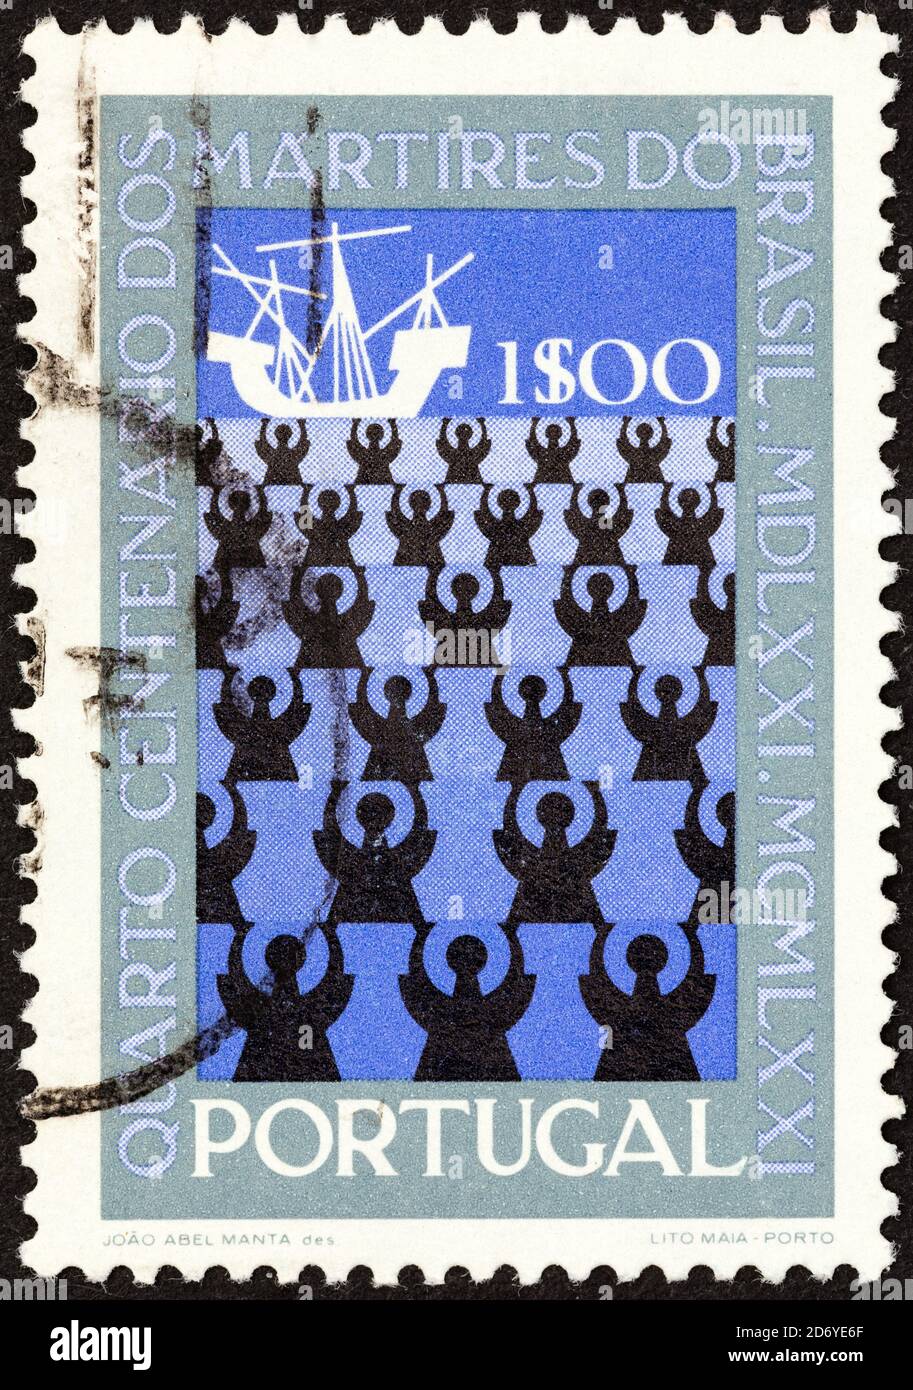 PORTUGAL - CIRCA 1971: A stamp printed in Portugal issued for the 400th anniversary of Martyrdom of Brazil Missionaries shows drowning Missionaries. Stock Photo